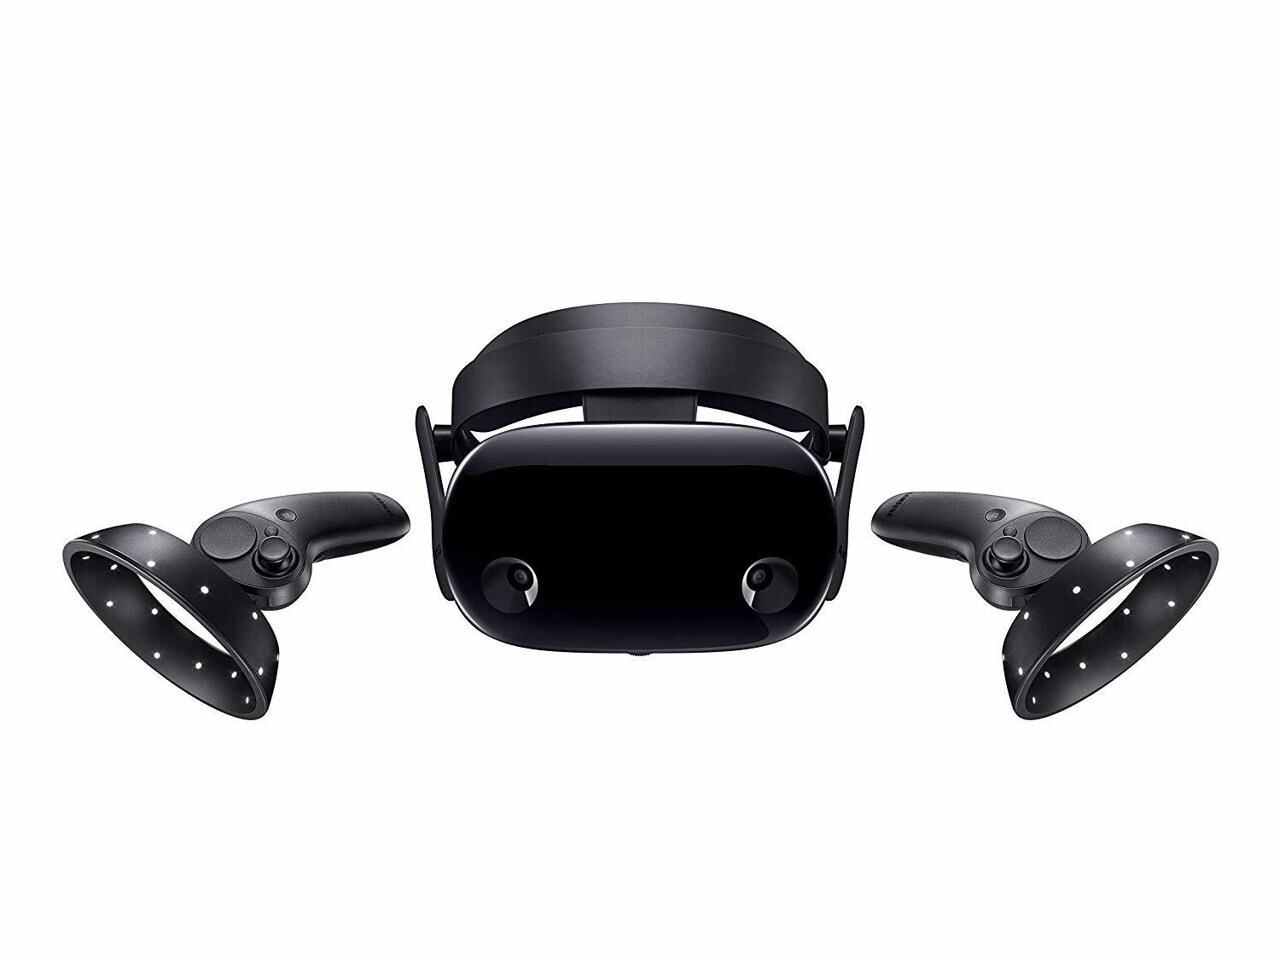 Samsung HMD Odyssey+ Windows Mixed Reality Headset with 2 Wireless Controllers